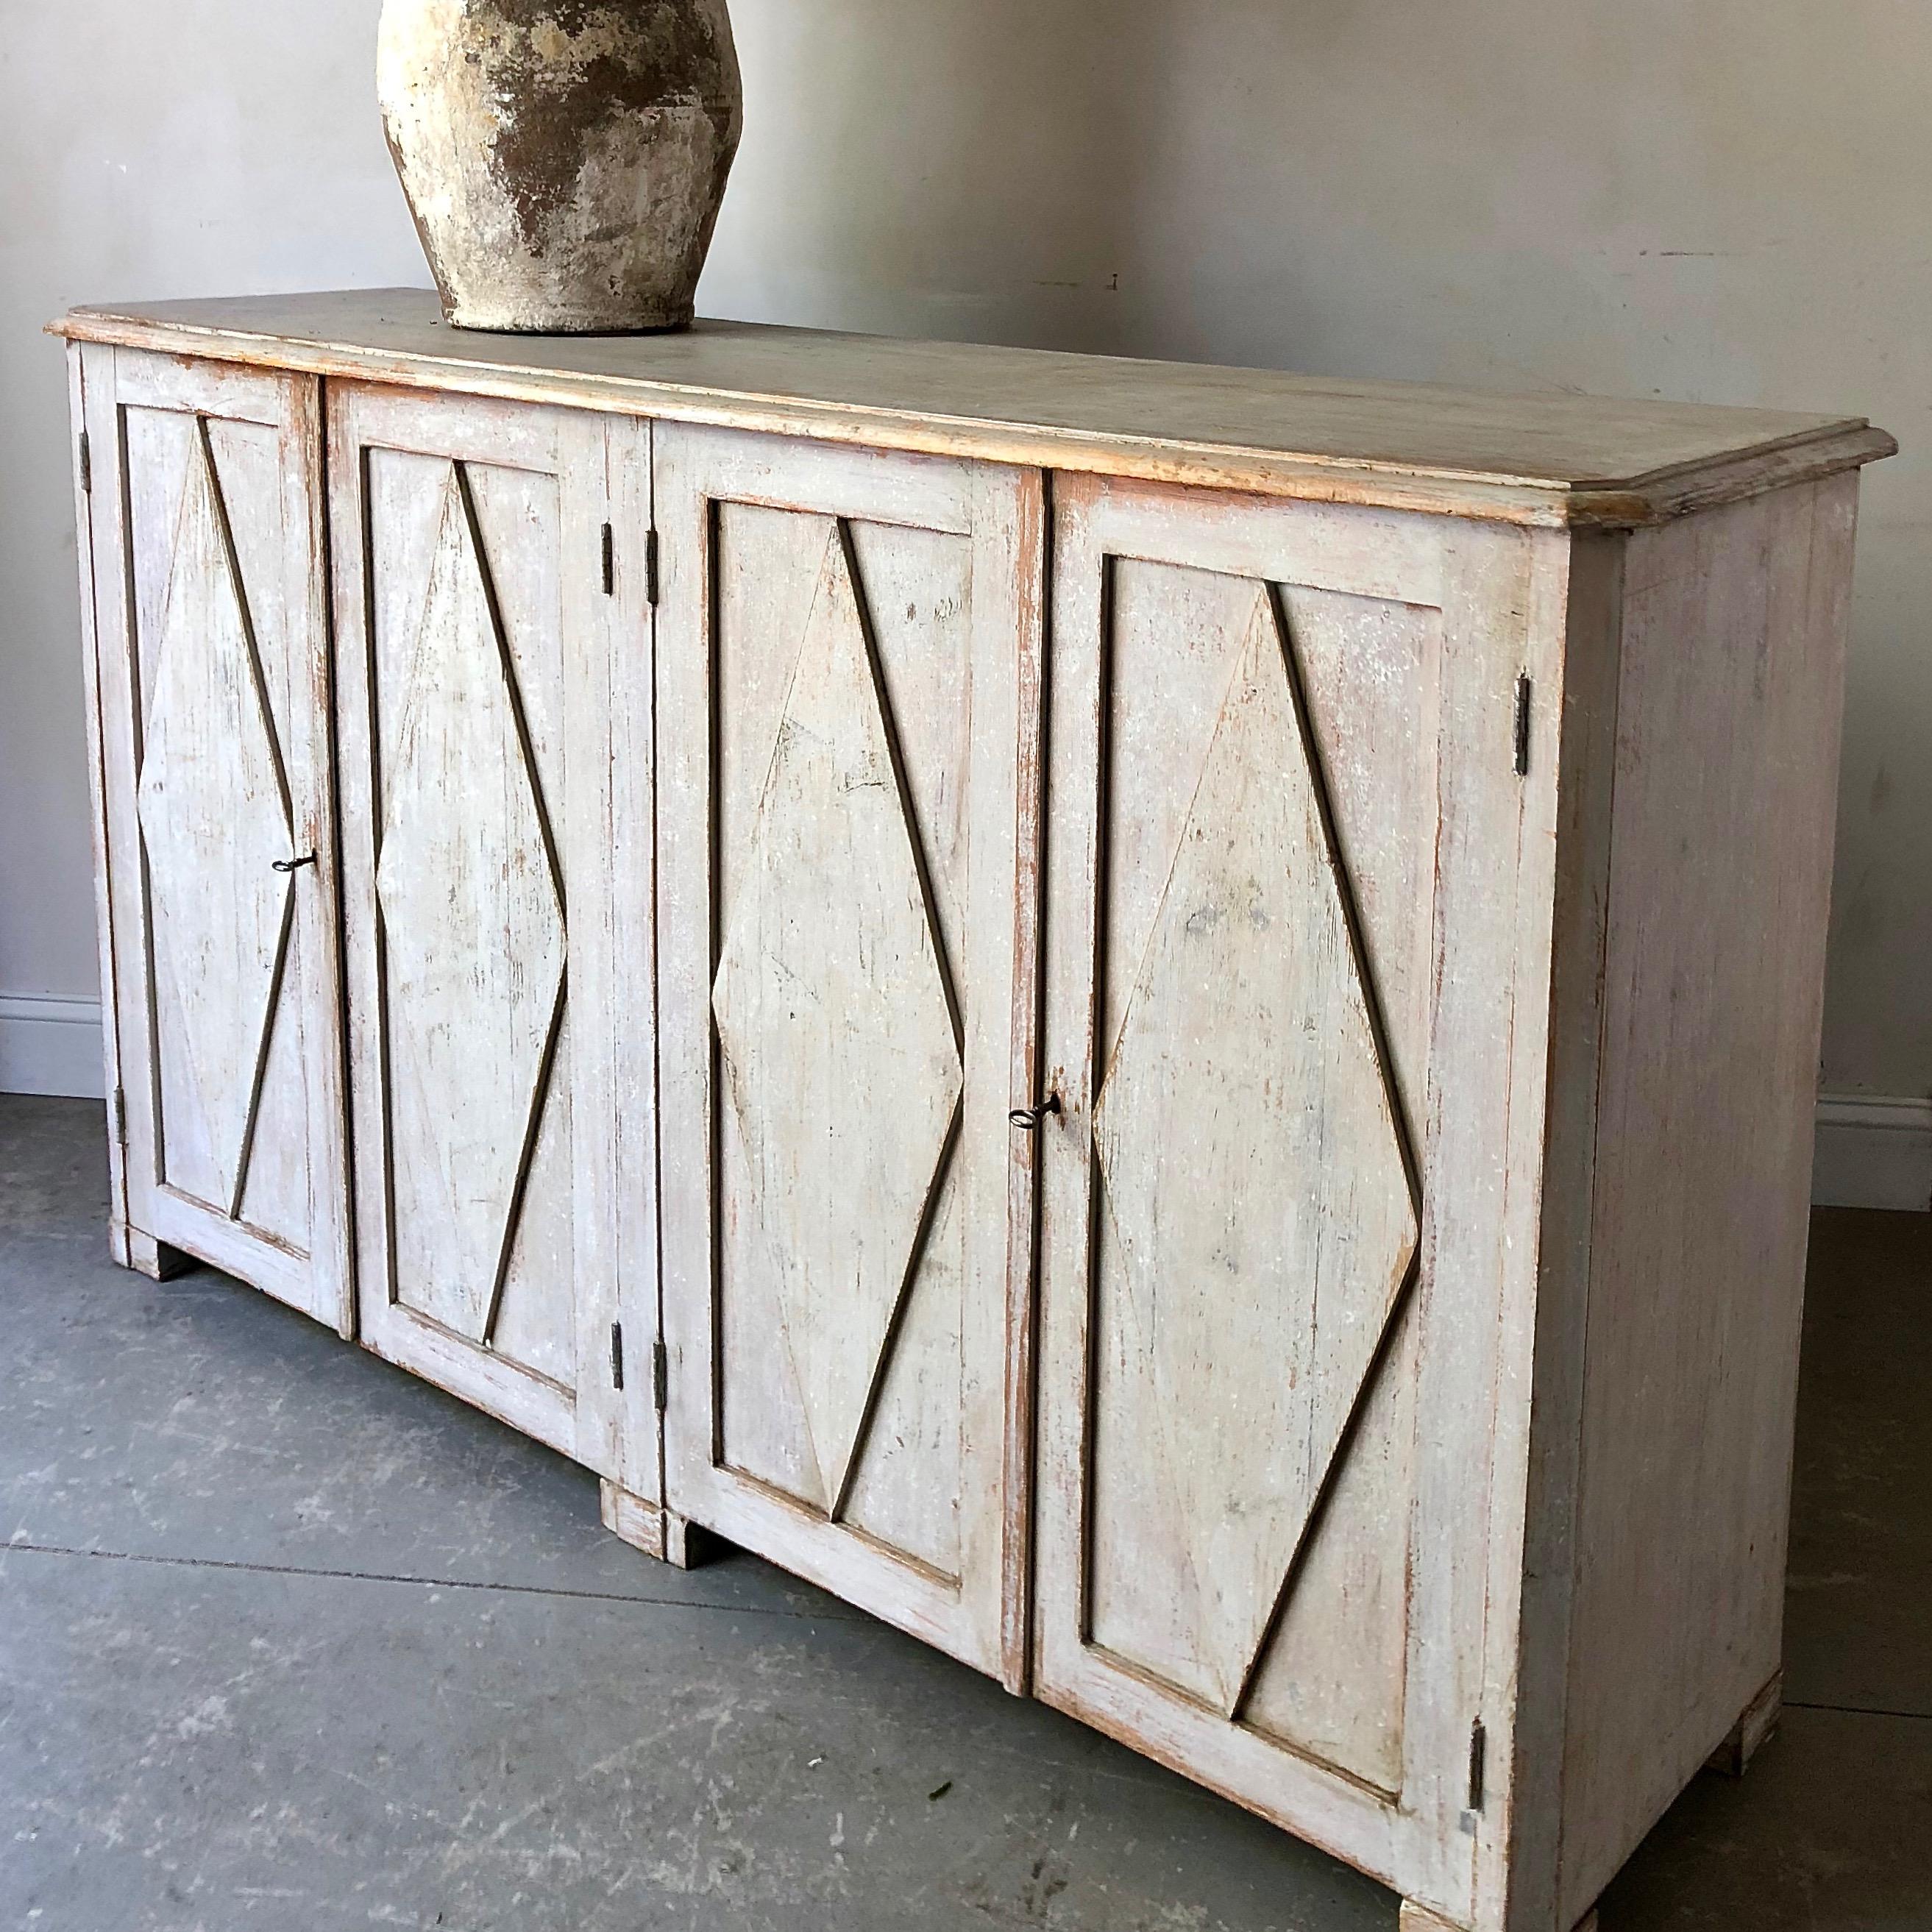 Large early 19th century Swedish Gustavian period sideboard in Classic Gustavian style including four panelled doors with diamond shaped lozenges. Wonderful find!
Stockholm, Sweden, circa 1810-1820.
Surprising pieces and objects, authentic,